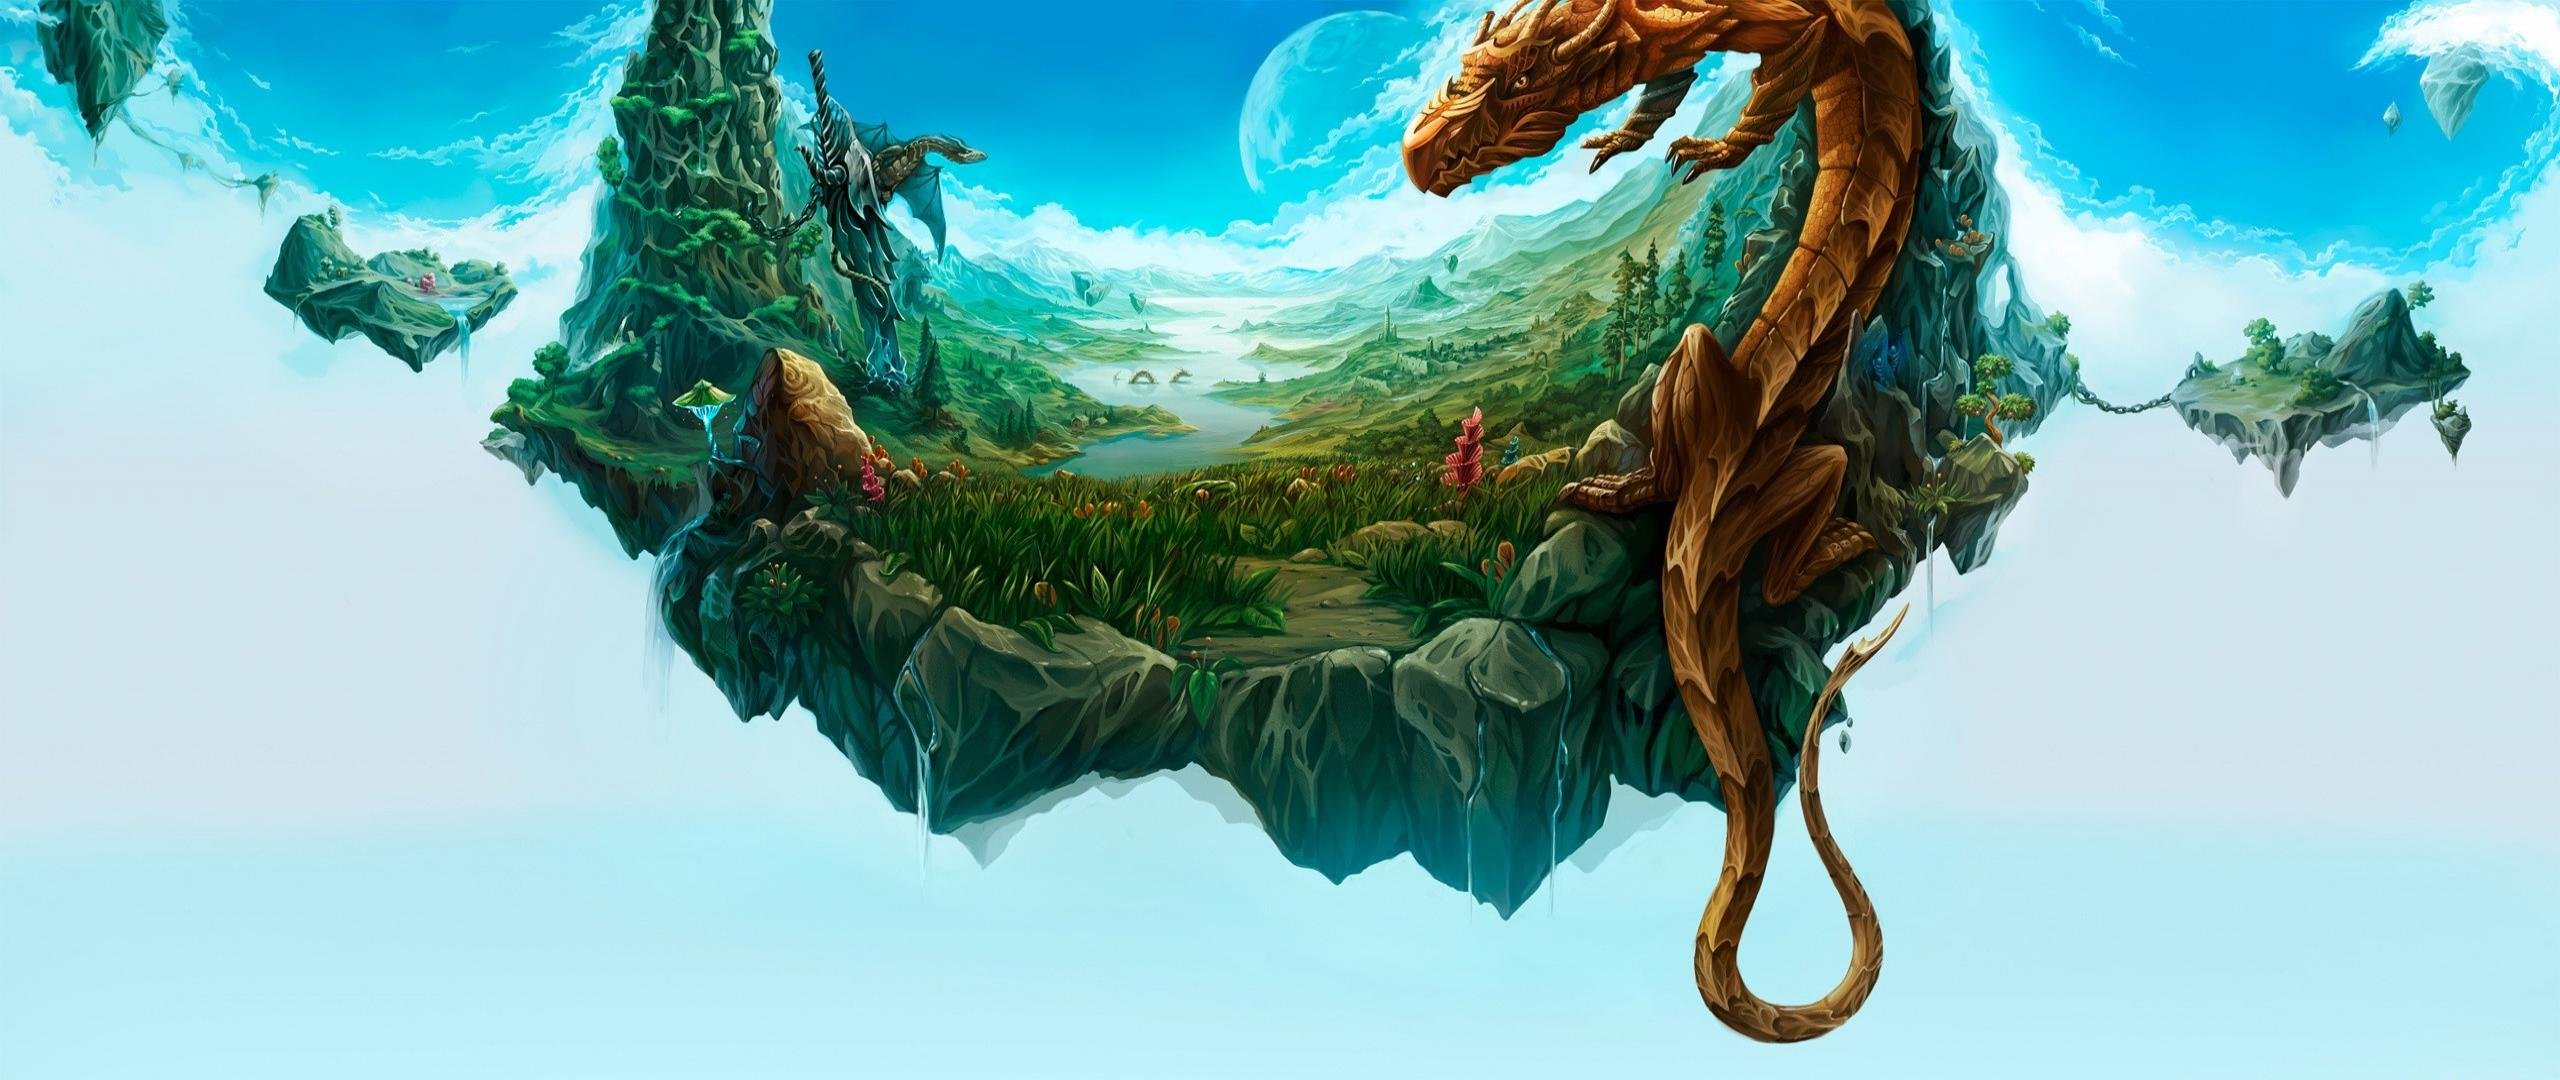 Download hd 2560x1080 Dragon PC background ID:146938 for free